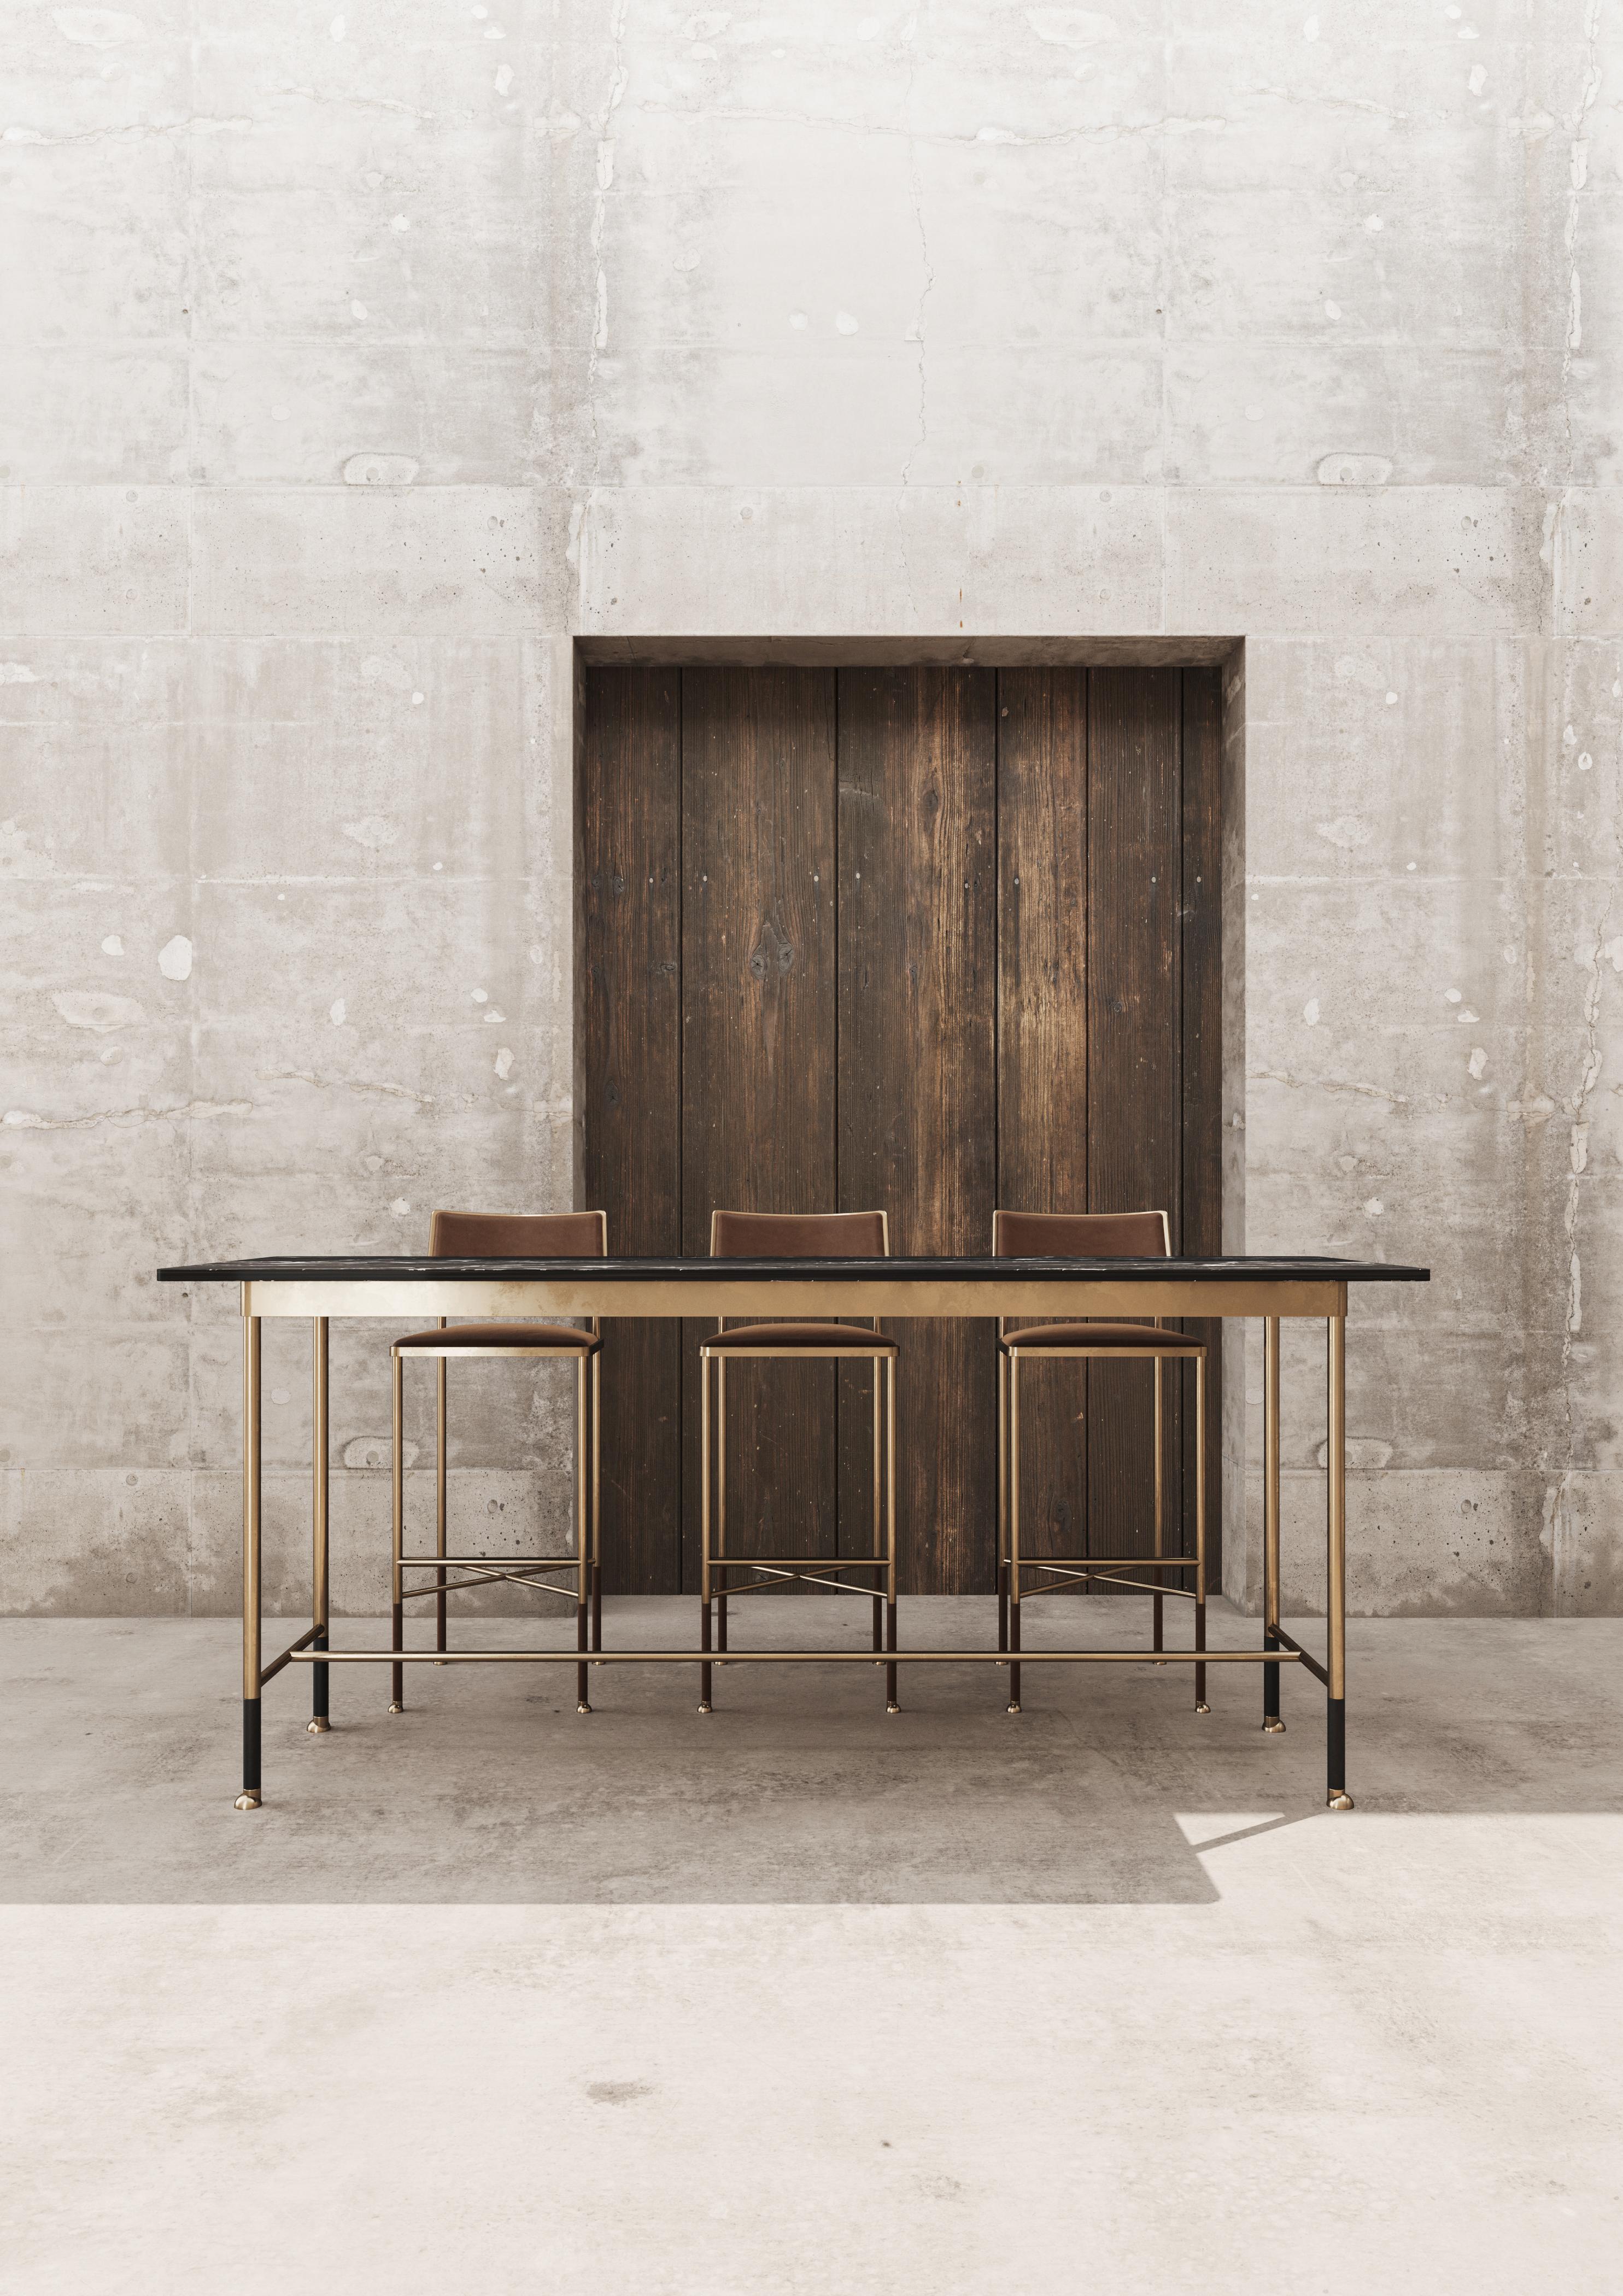 The talk to me bar table creates an opulent solution for small spaces. Designed to be beautifully unobtrusive with its slender, leather wrapped legs and minimal elegance. Featuring a stone top, brass frame and a detailed cross over bar for resting